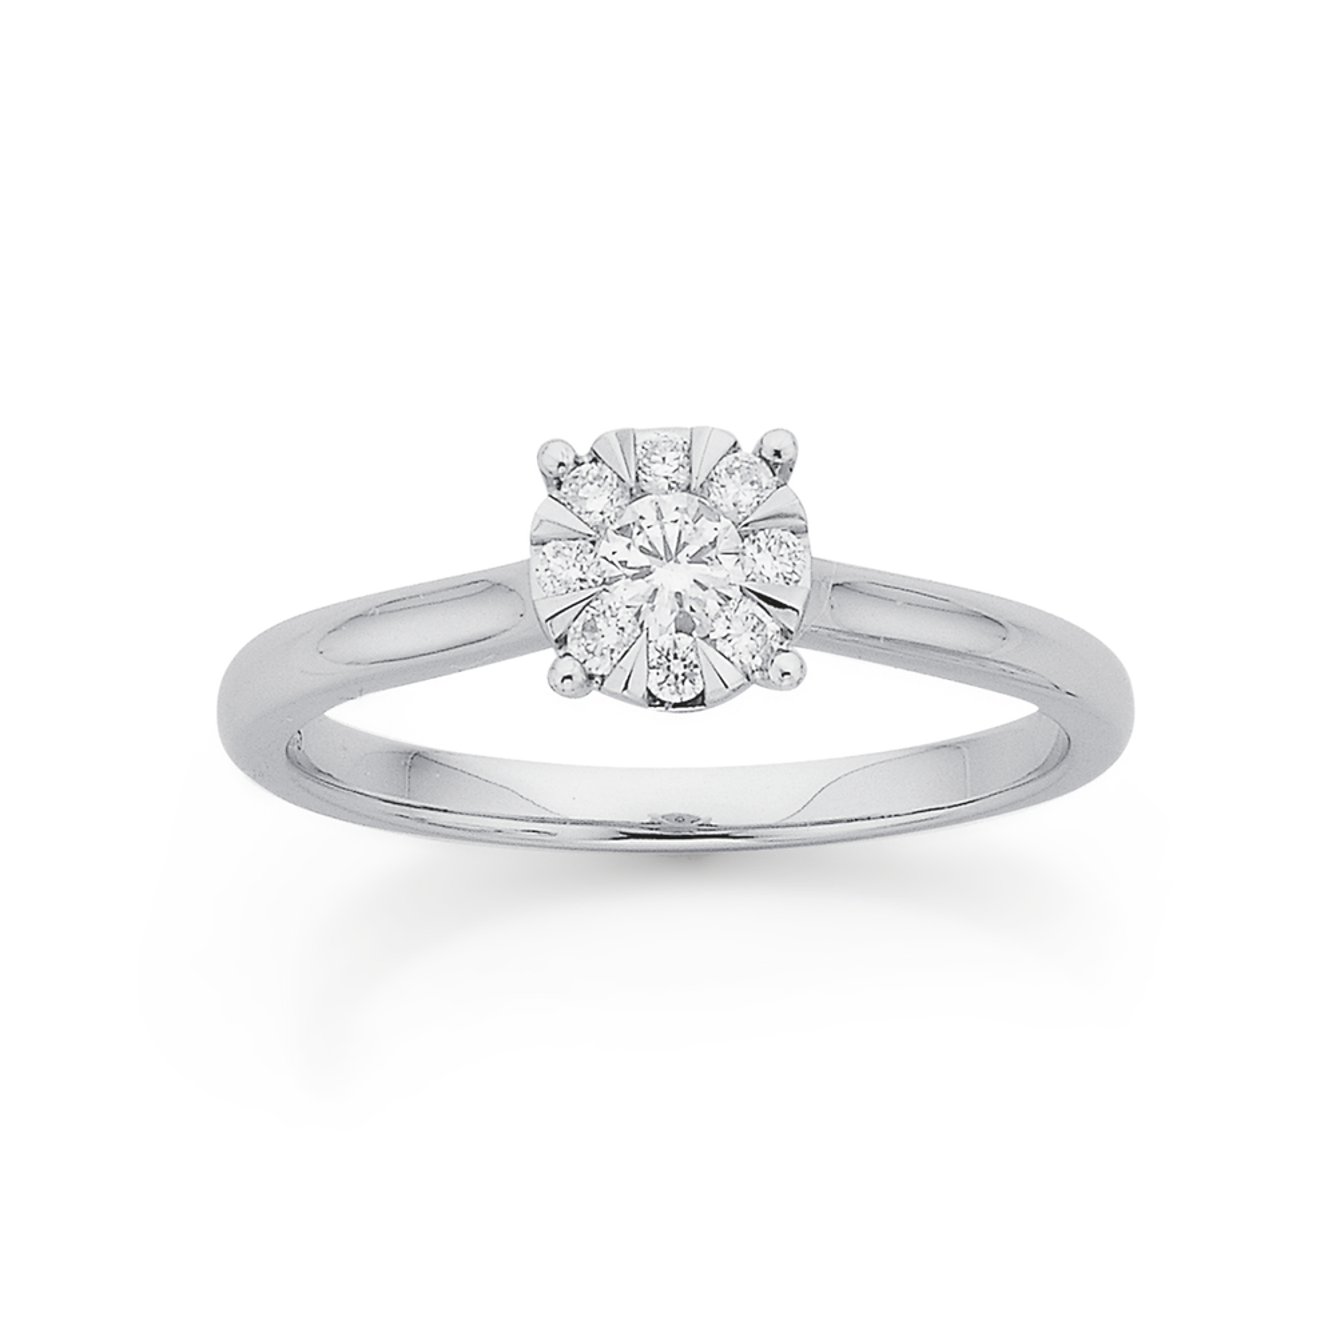 Diamond rings, solitaires, dress rings, eternity and anniversary rings ...